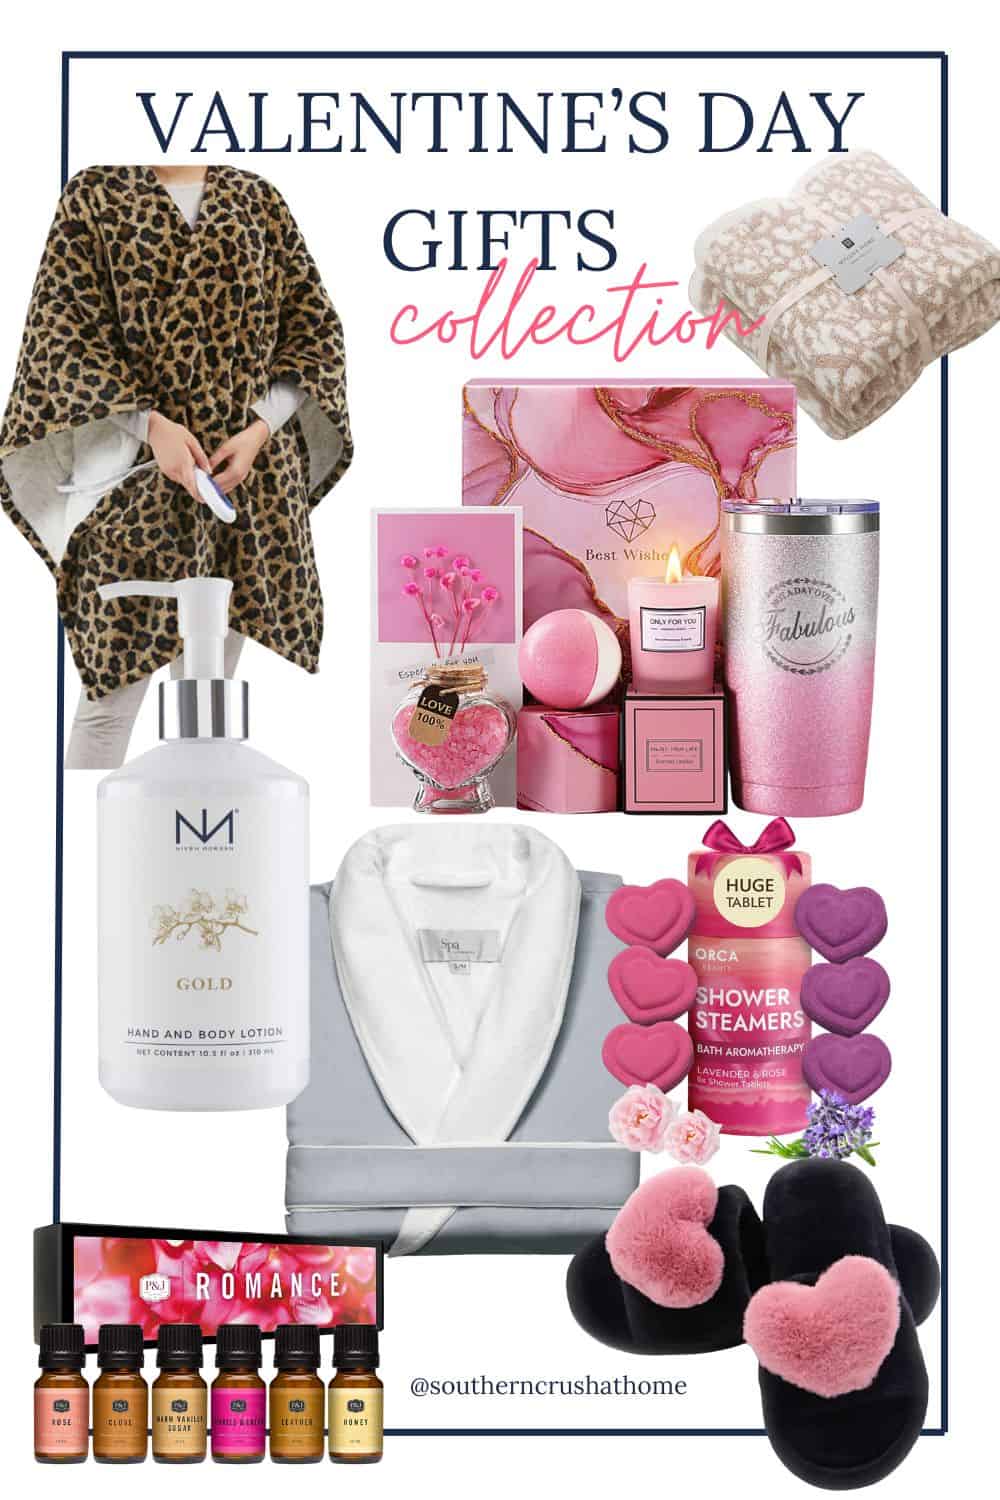 Valentine's Day Gifts Collection